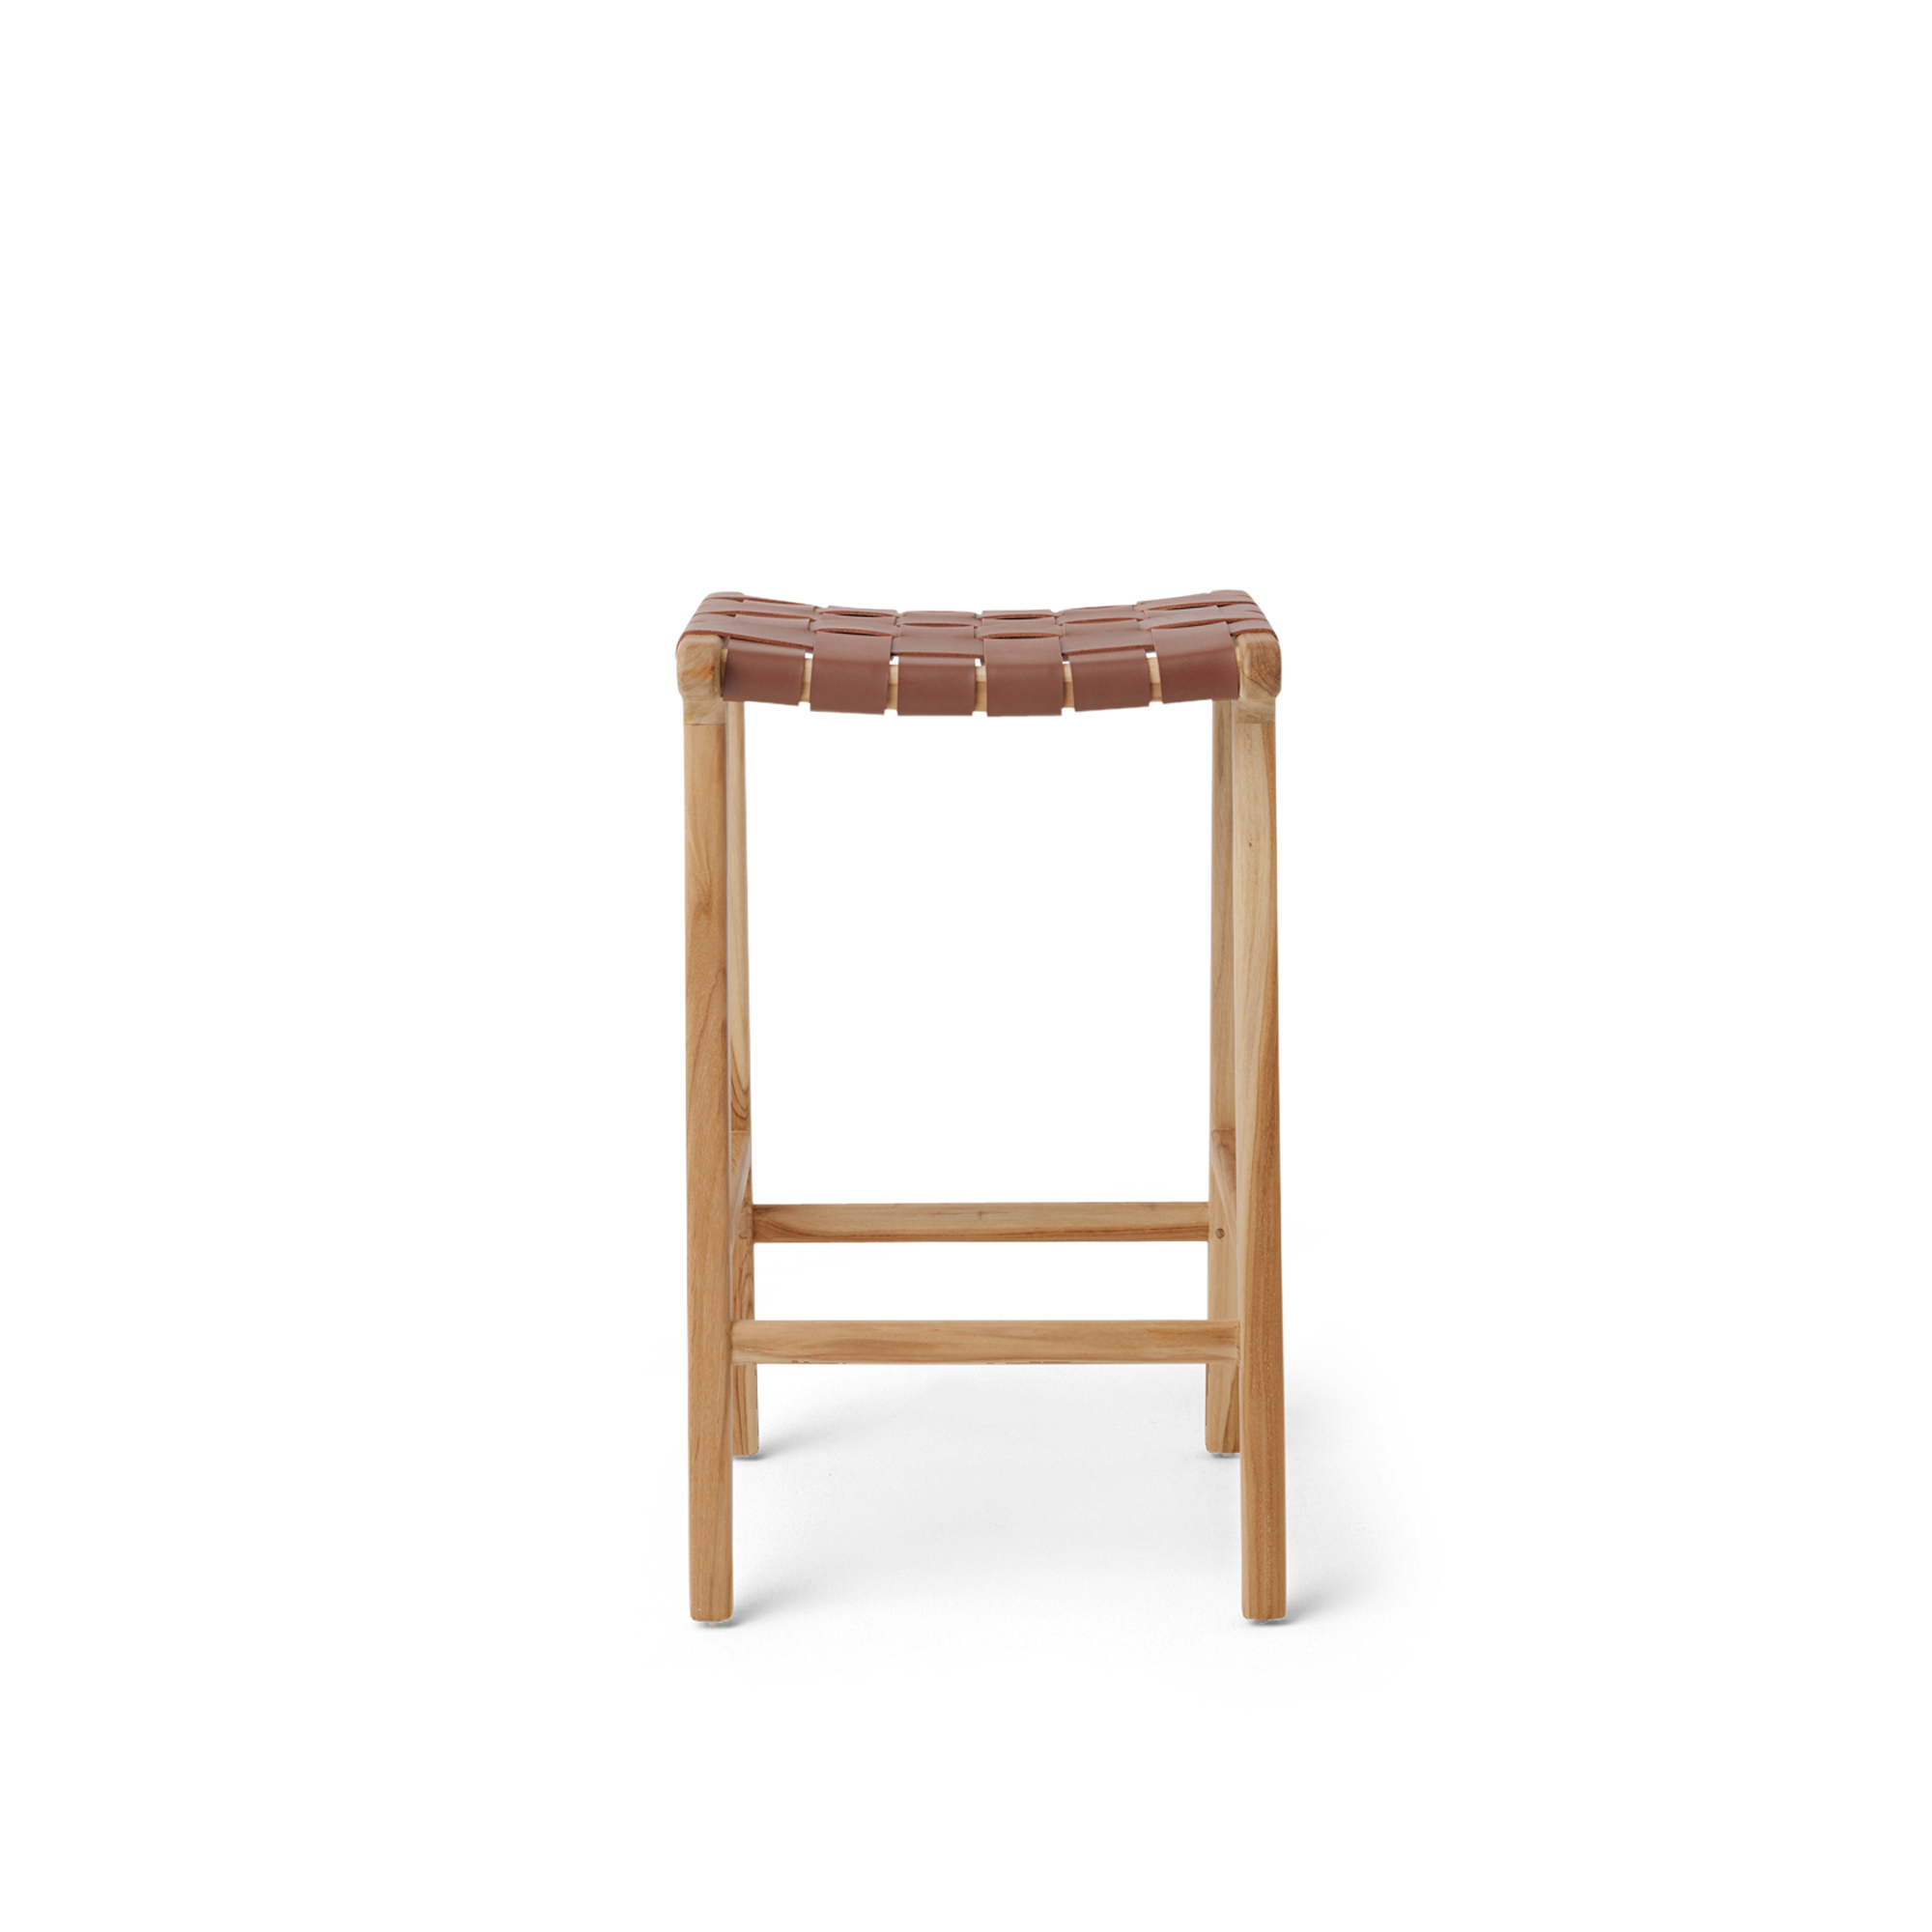 open box - stool #3 in whiskey